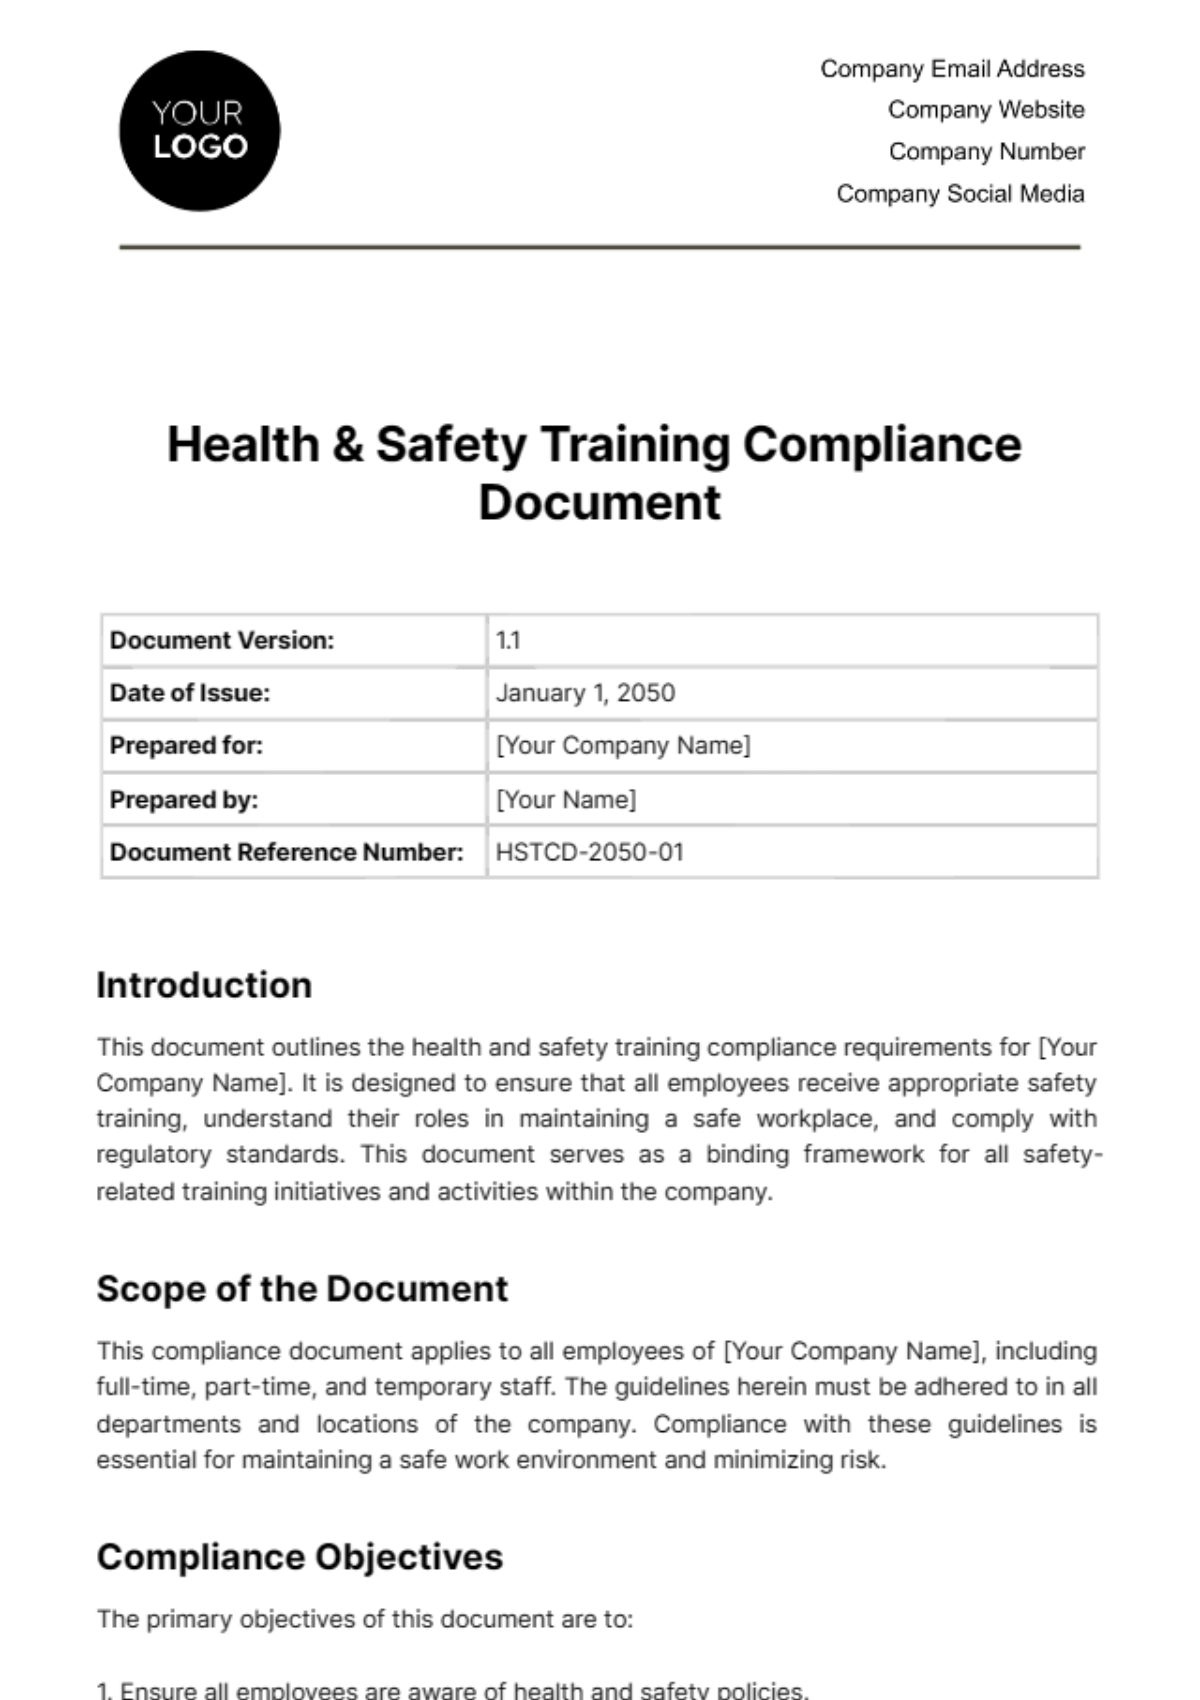 Free Health & Safety Training Compliance Document Template